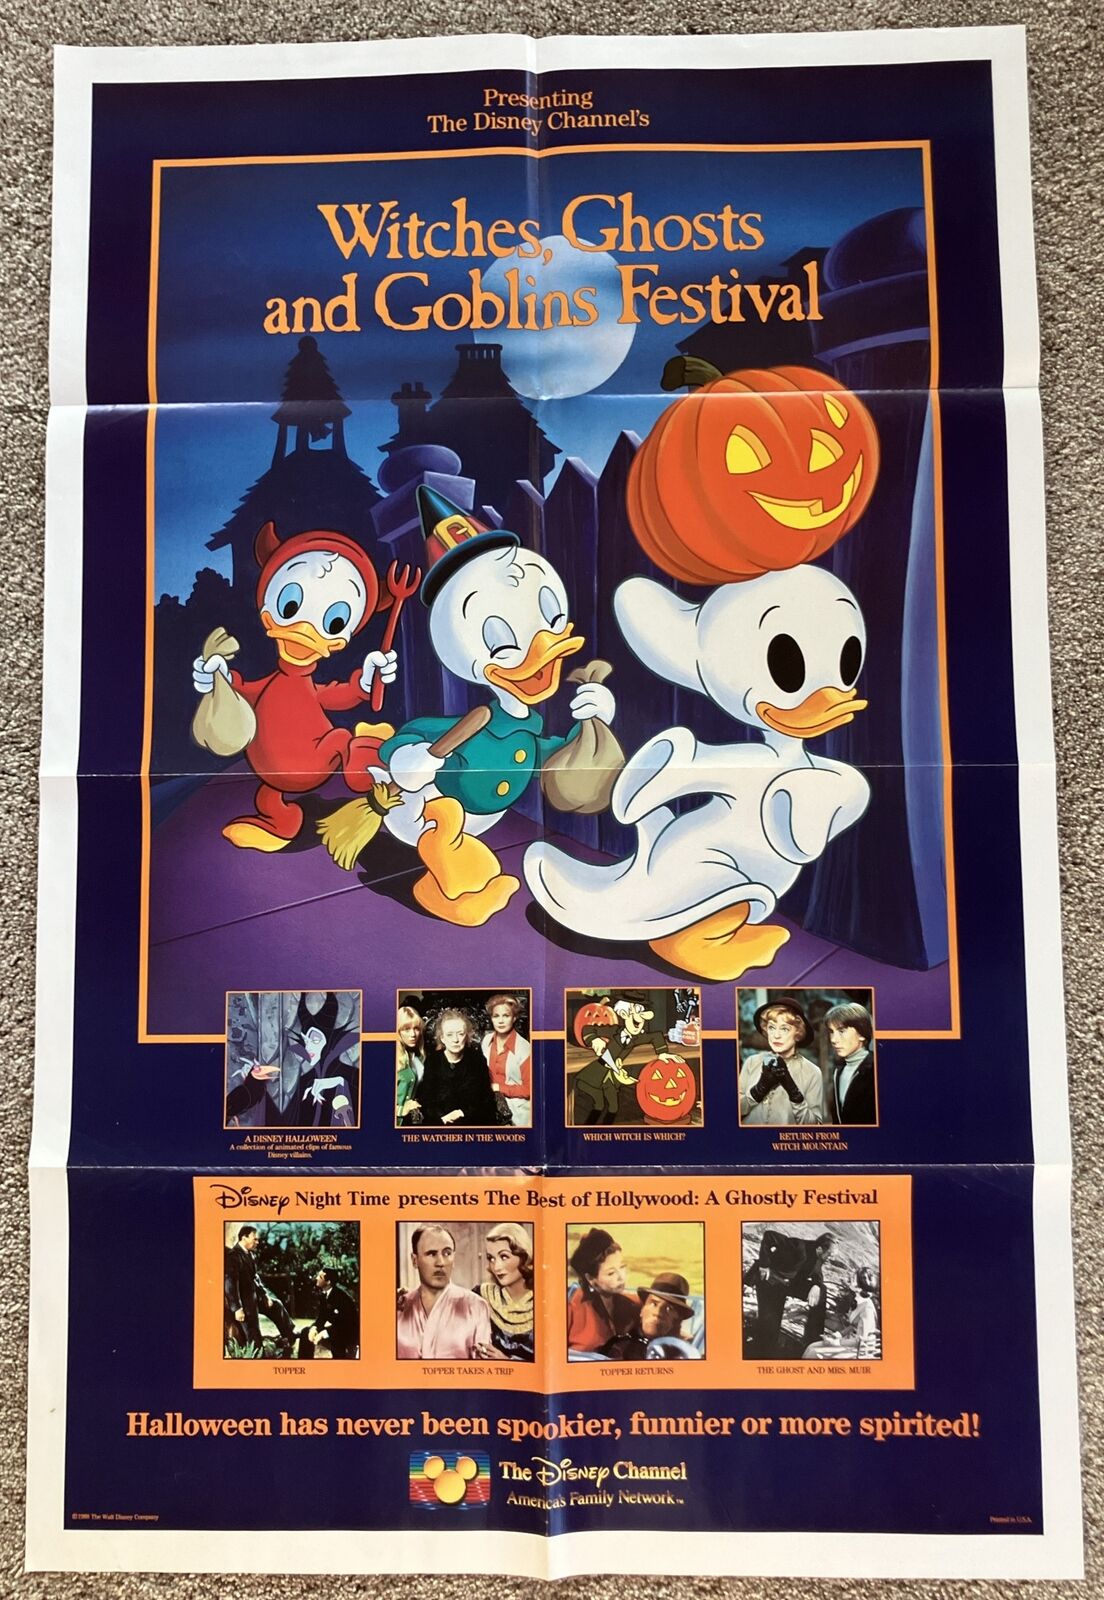 SALE Rare 1988 Witches, ghost and goblins festival box office promotional poster